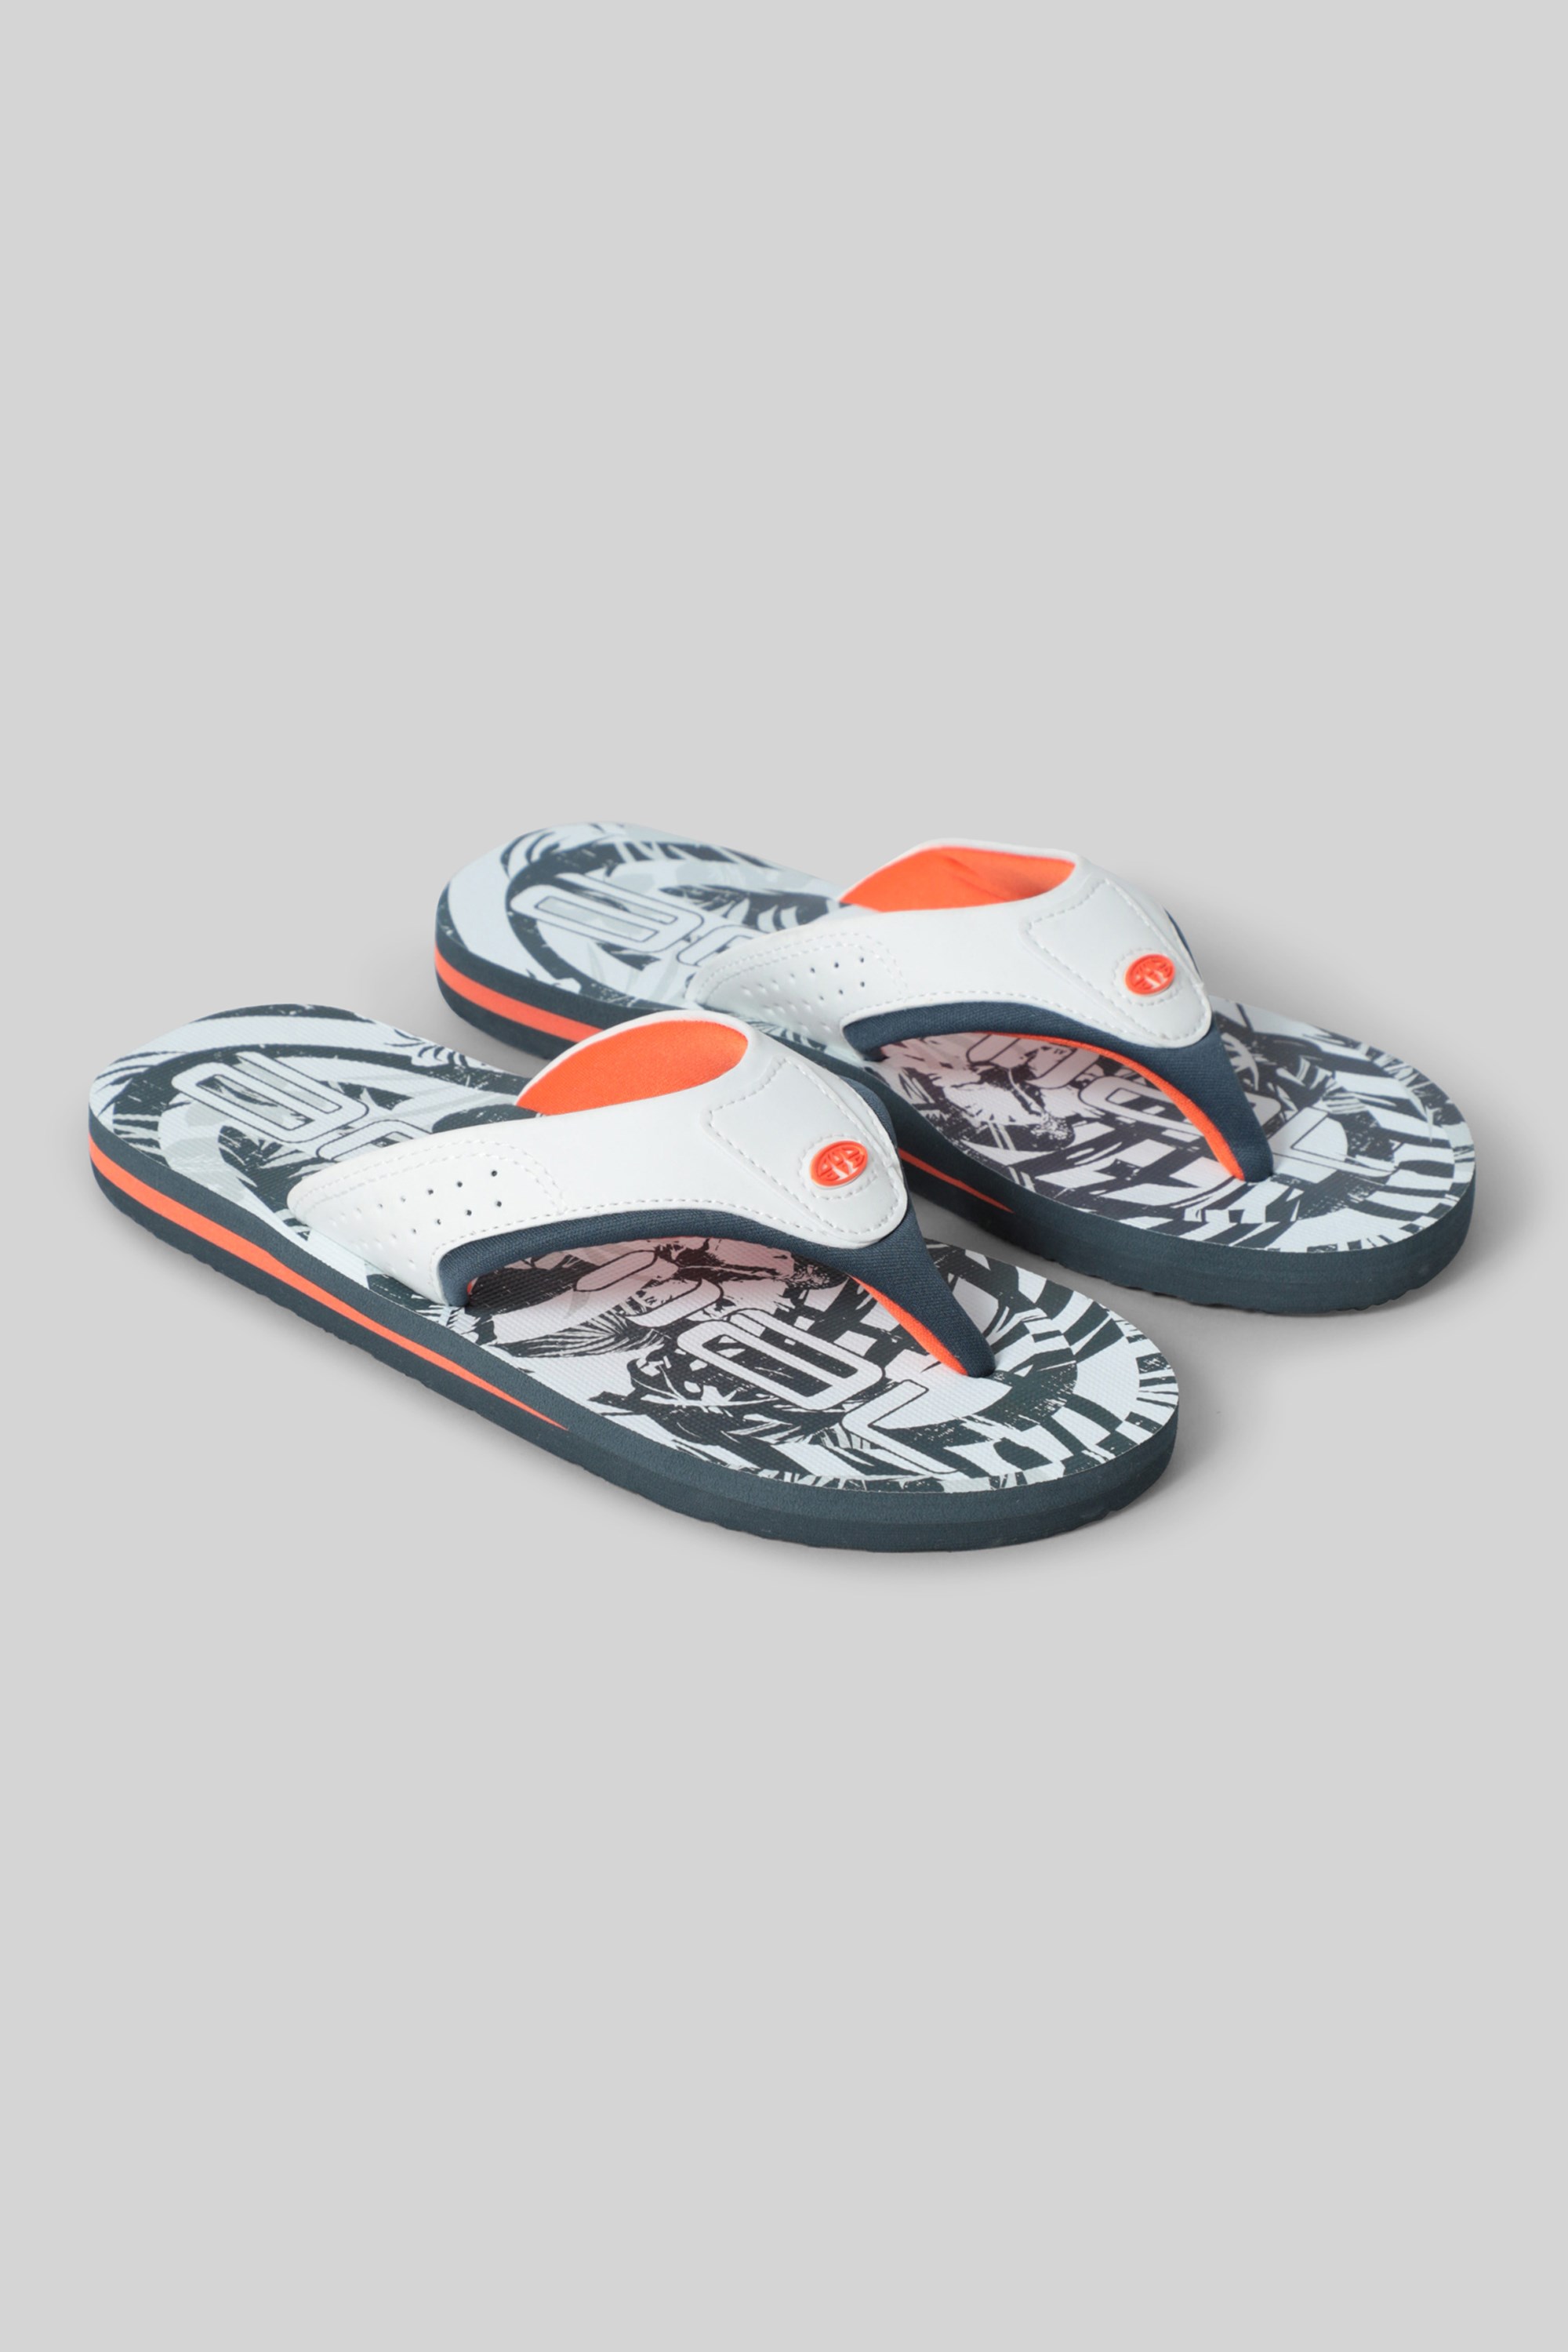 WAY.MAY Narwhals are My Spirit Animal Unisex Flip Flops Slippers Open Toe Beach Sandal 